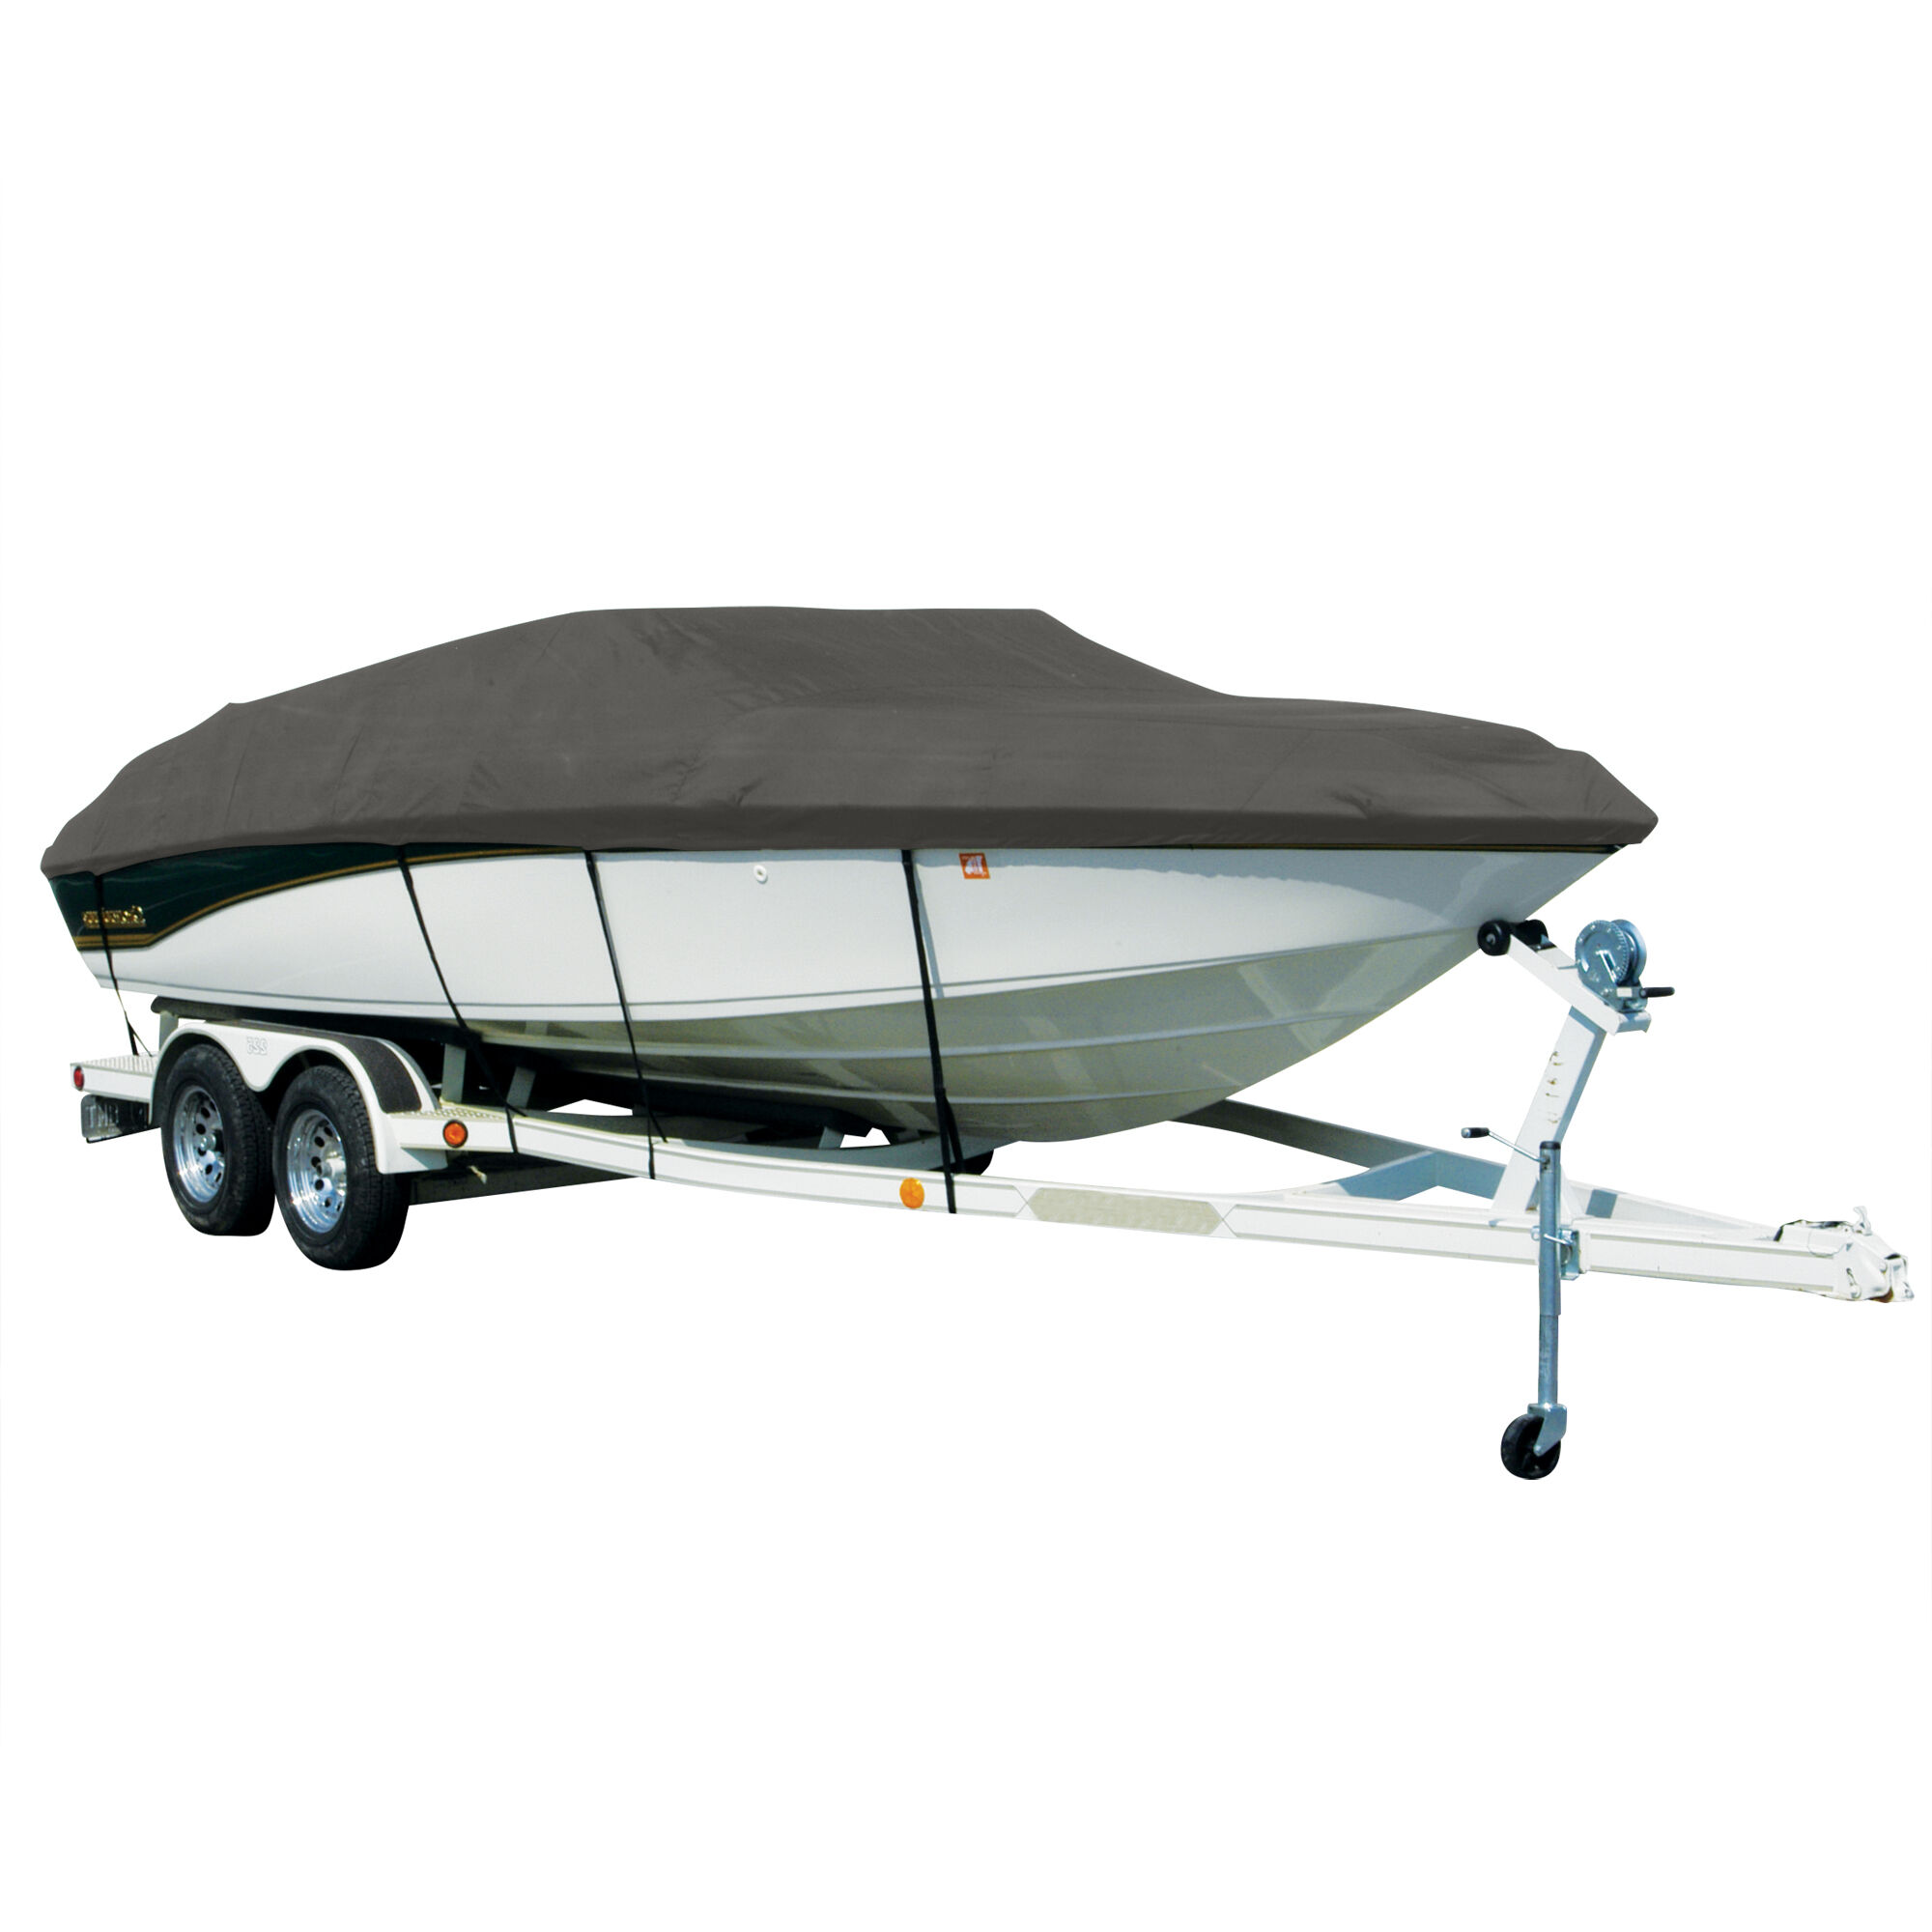 Covermate Exact Fit Sharkskin Boat Cover For Hydra Sport Dv 200 Ff Port Troll MOTOR in Charcoal